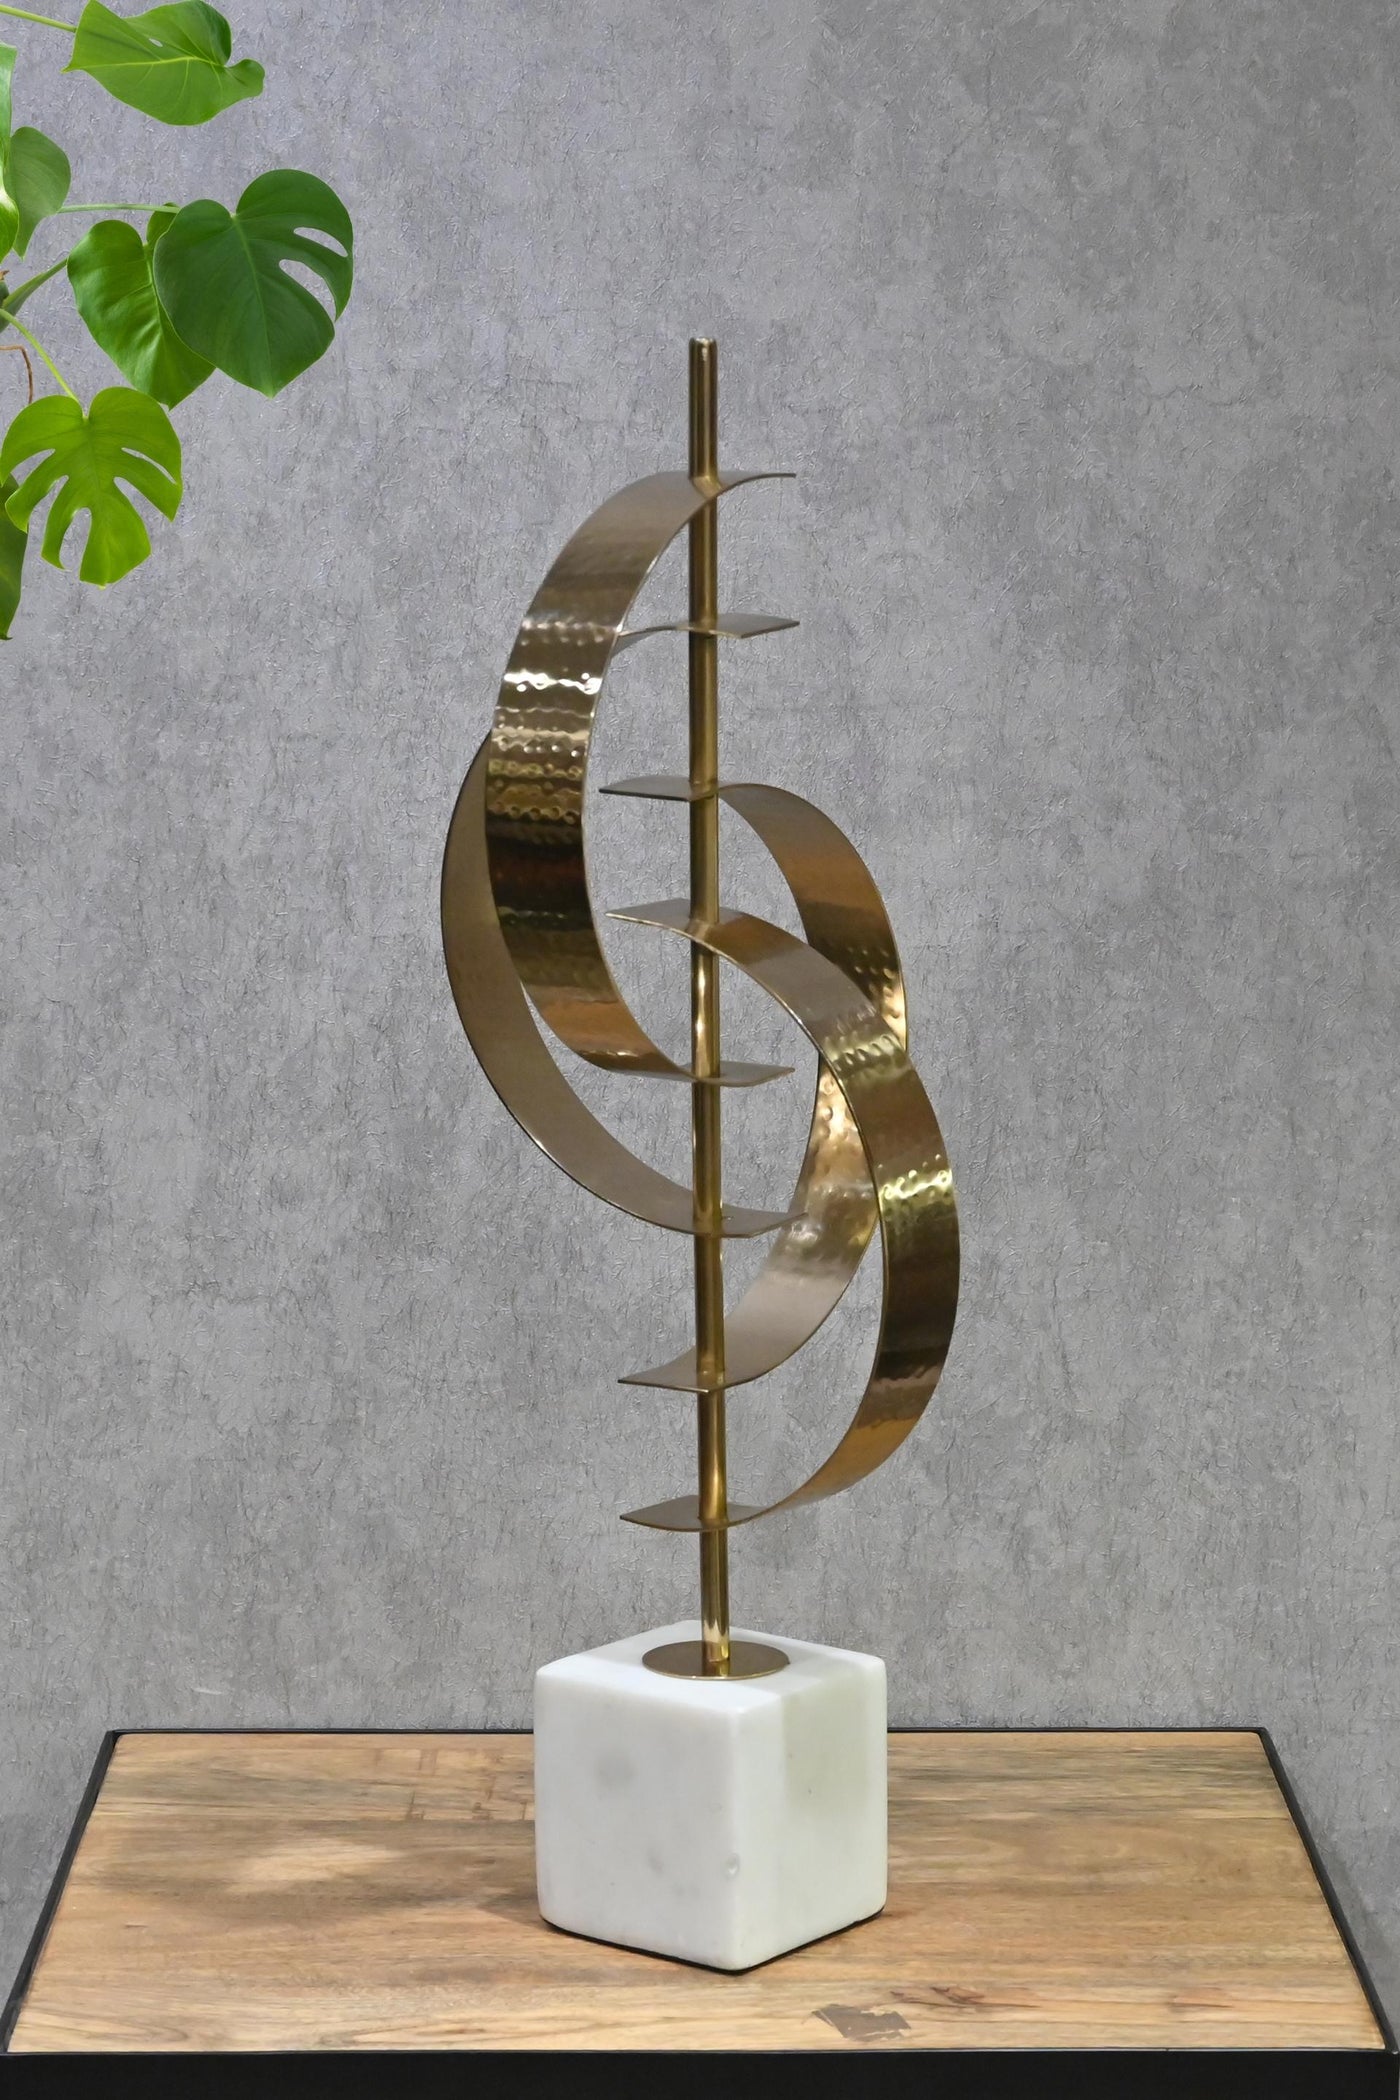 Modern Geometric Golden Metal Art Sculpture for your Home or Office Decor-Large